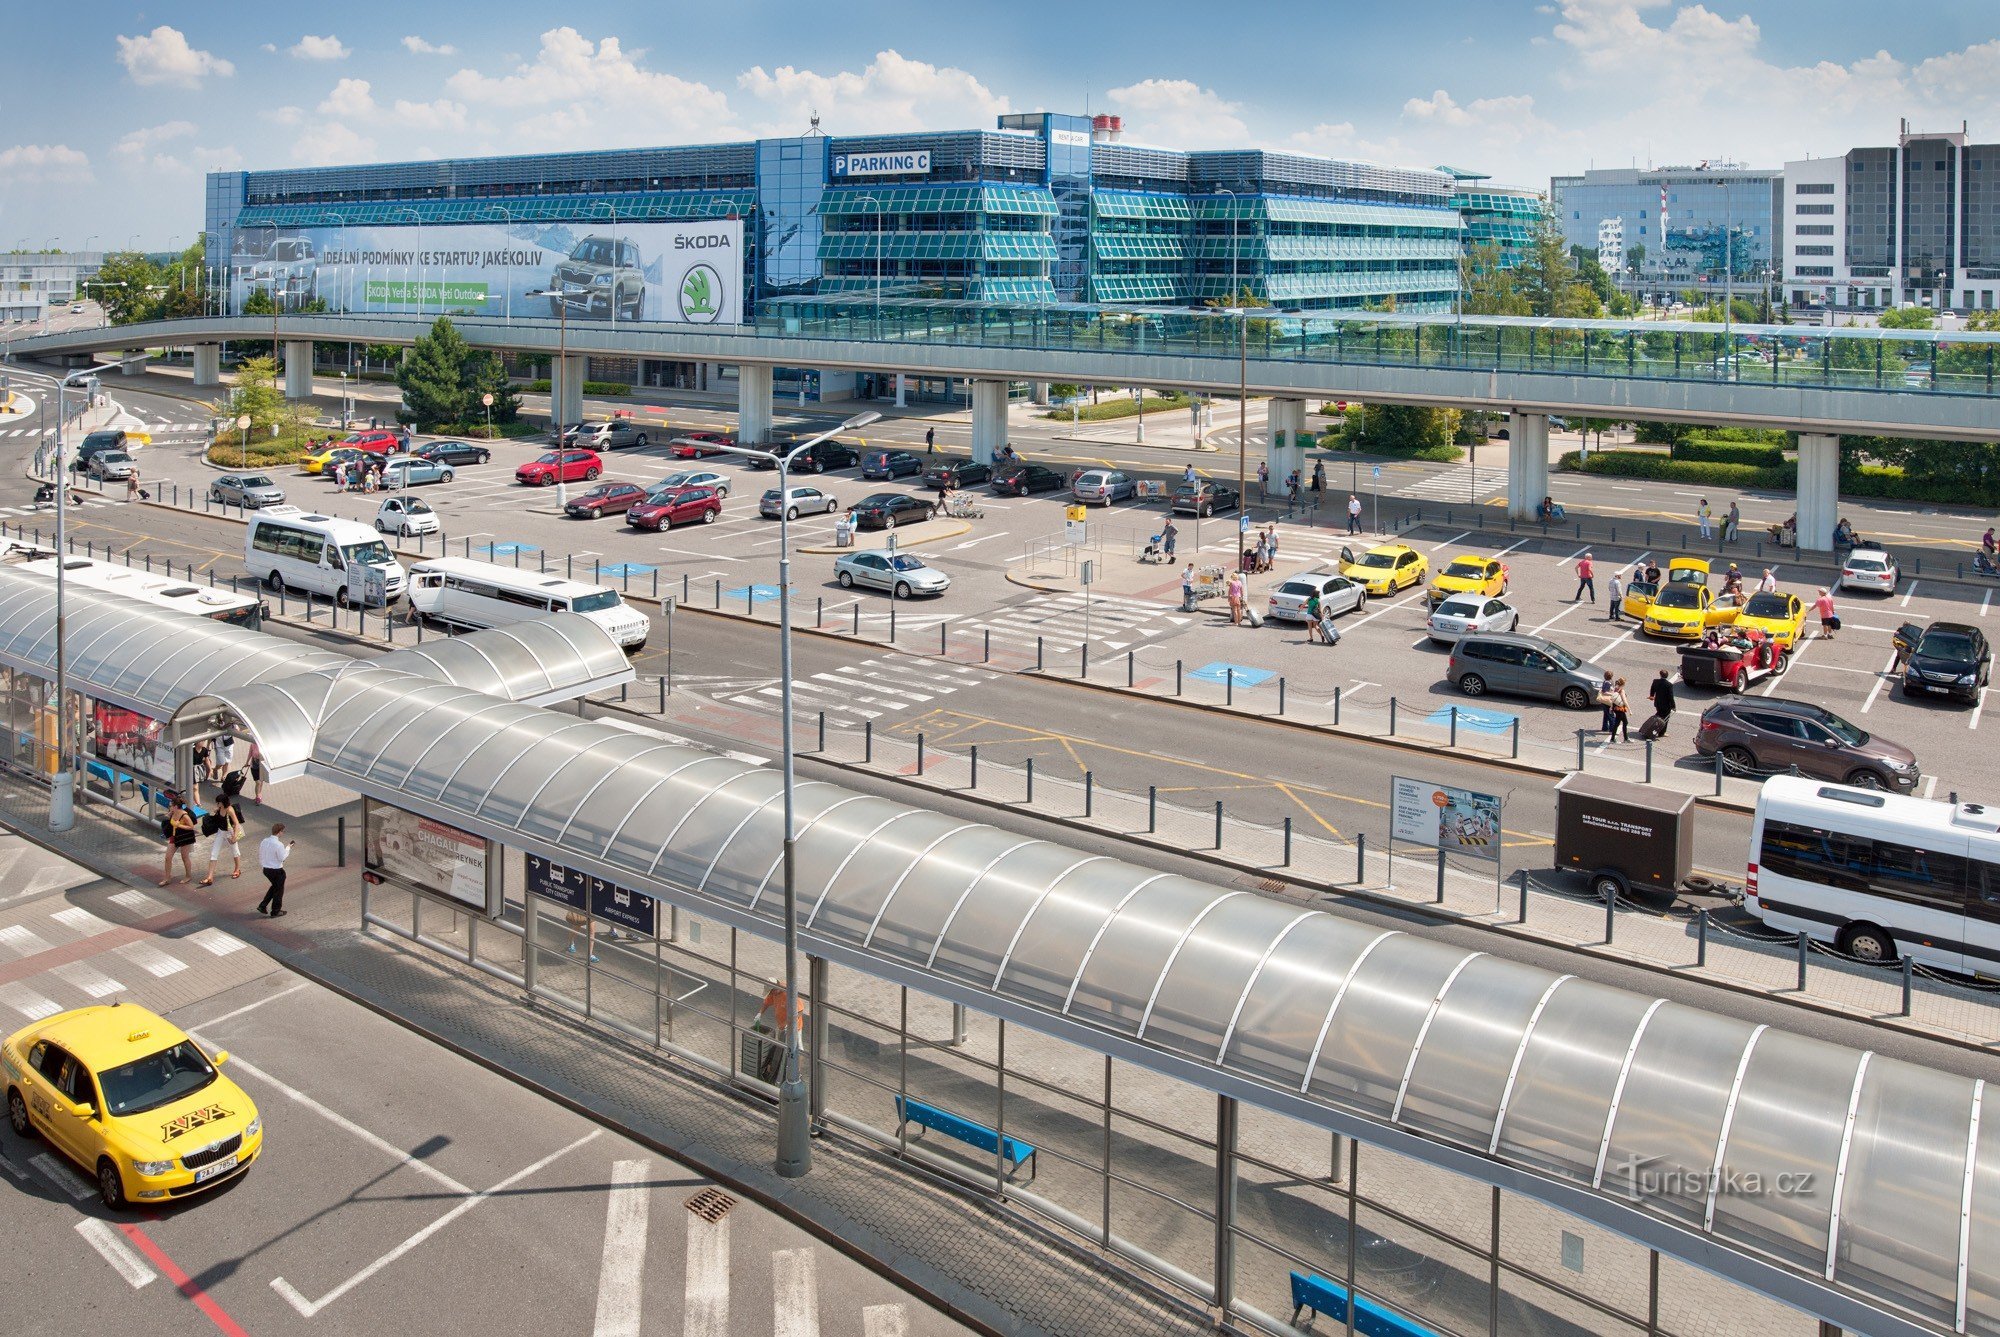 Prague Airport is changing to accommodate passengers, it has reduced the prices of refreshments and parking fees